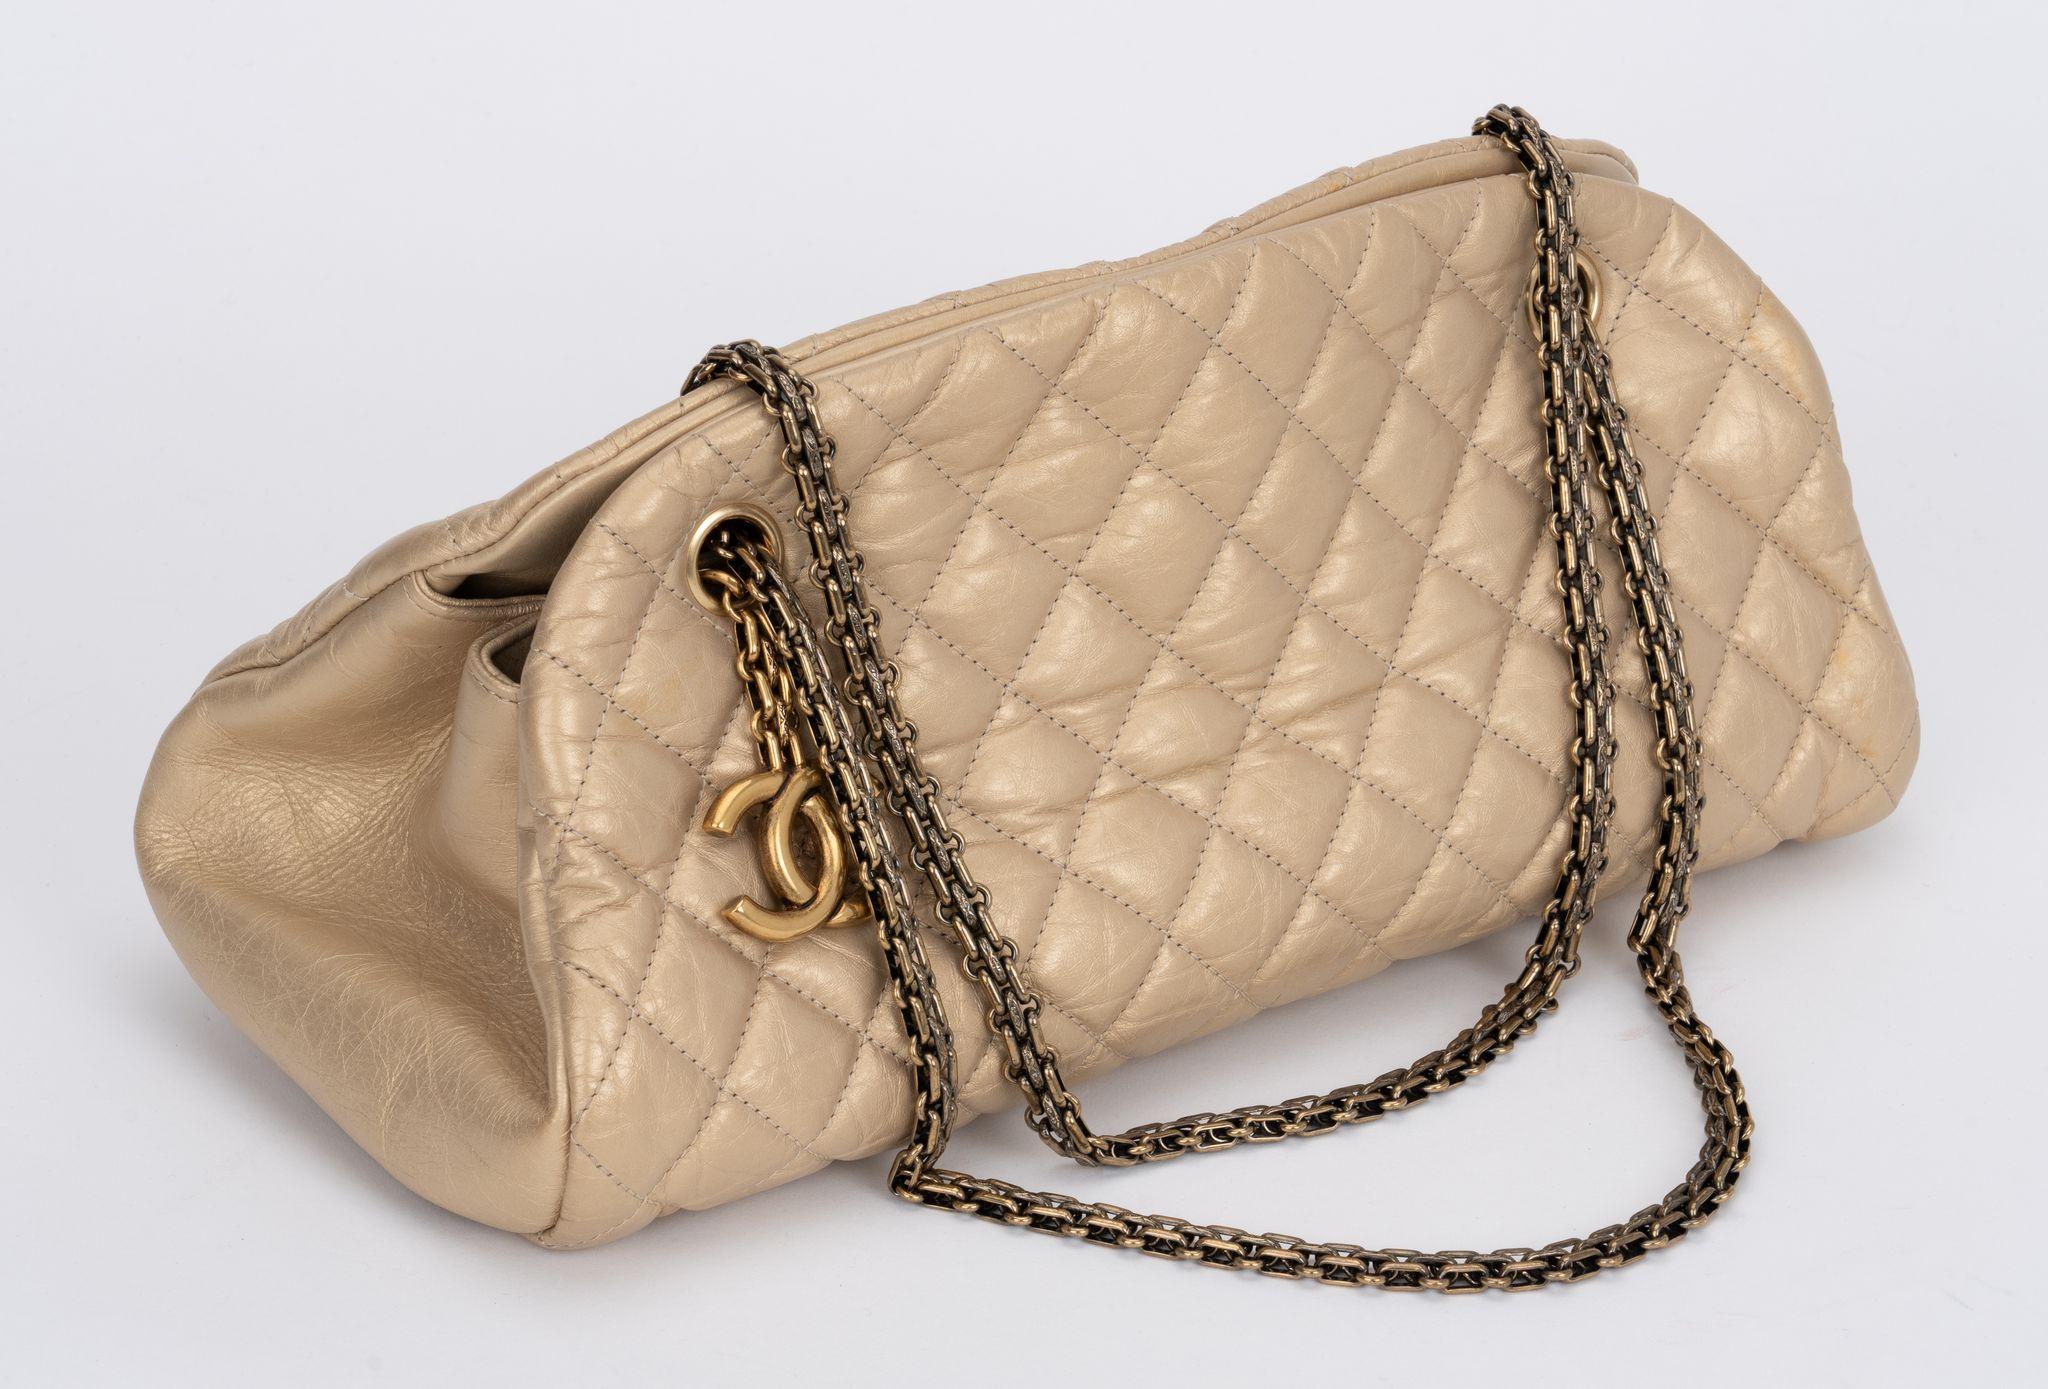 Chanel gold distressed mademoiselle bag with bronze hardware. excellent condition. Shoulder drop 8